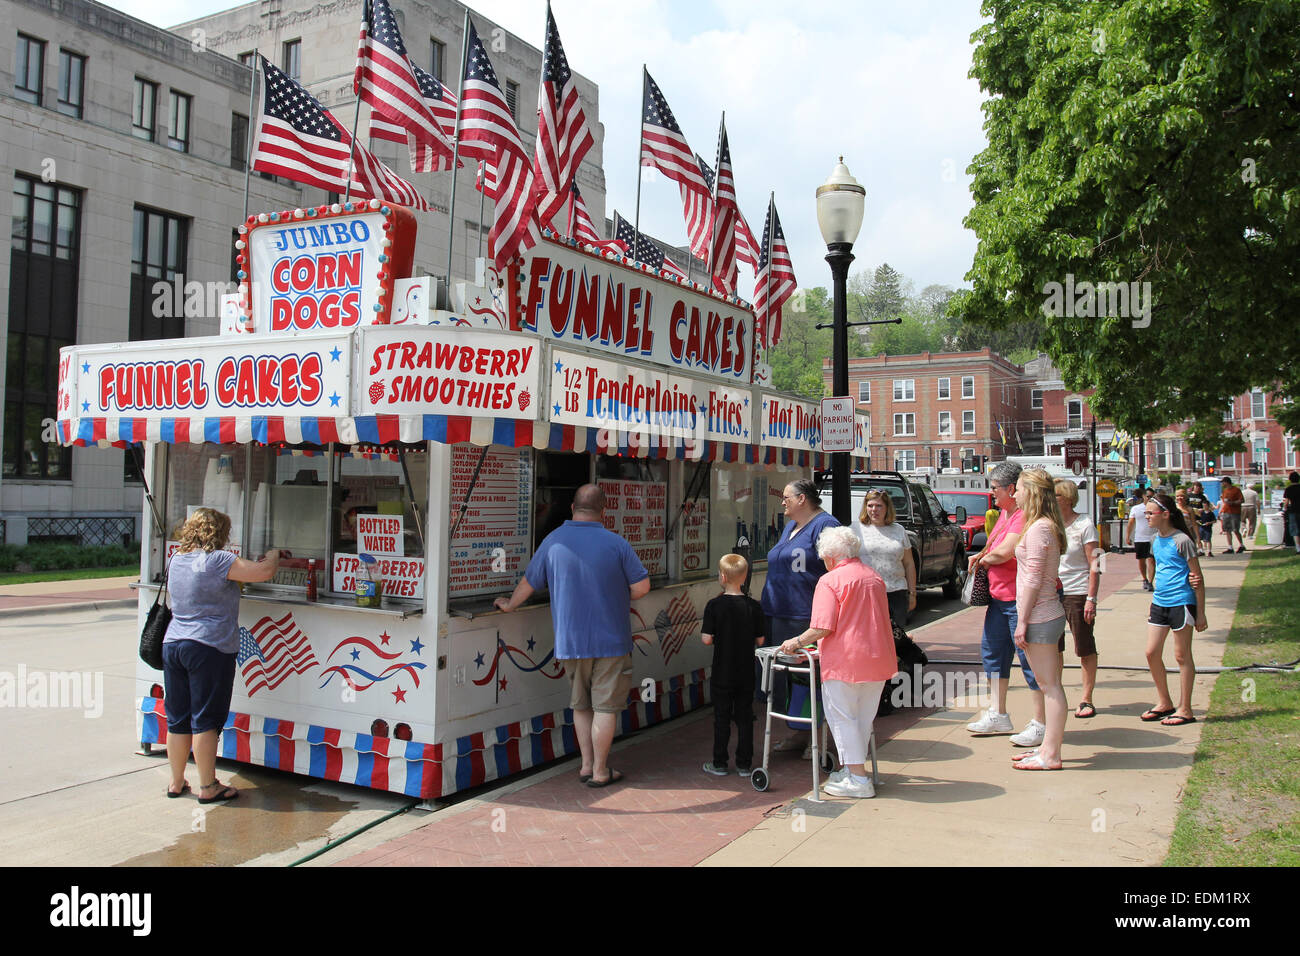 Stock Photo - Funnel Cakes Vendor Booth at Festival